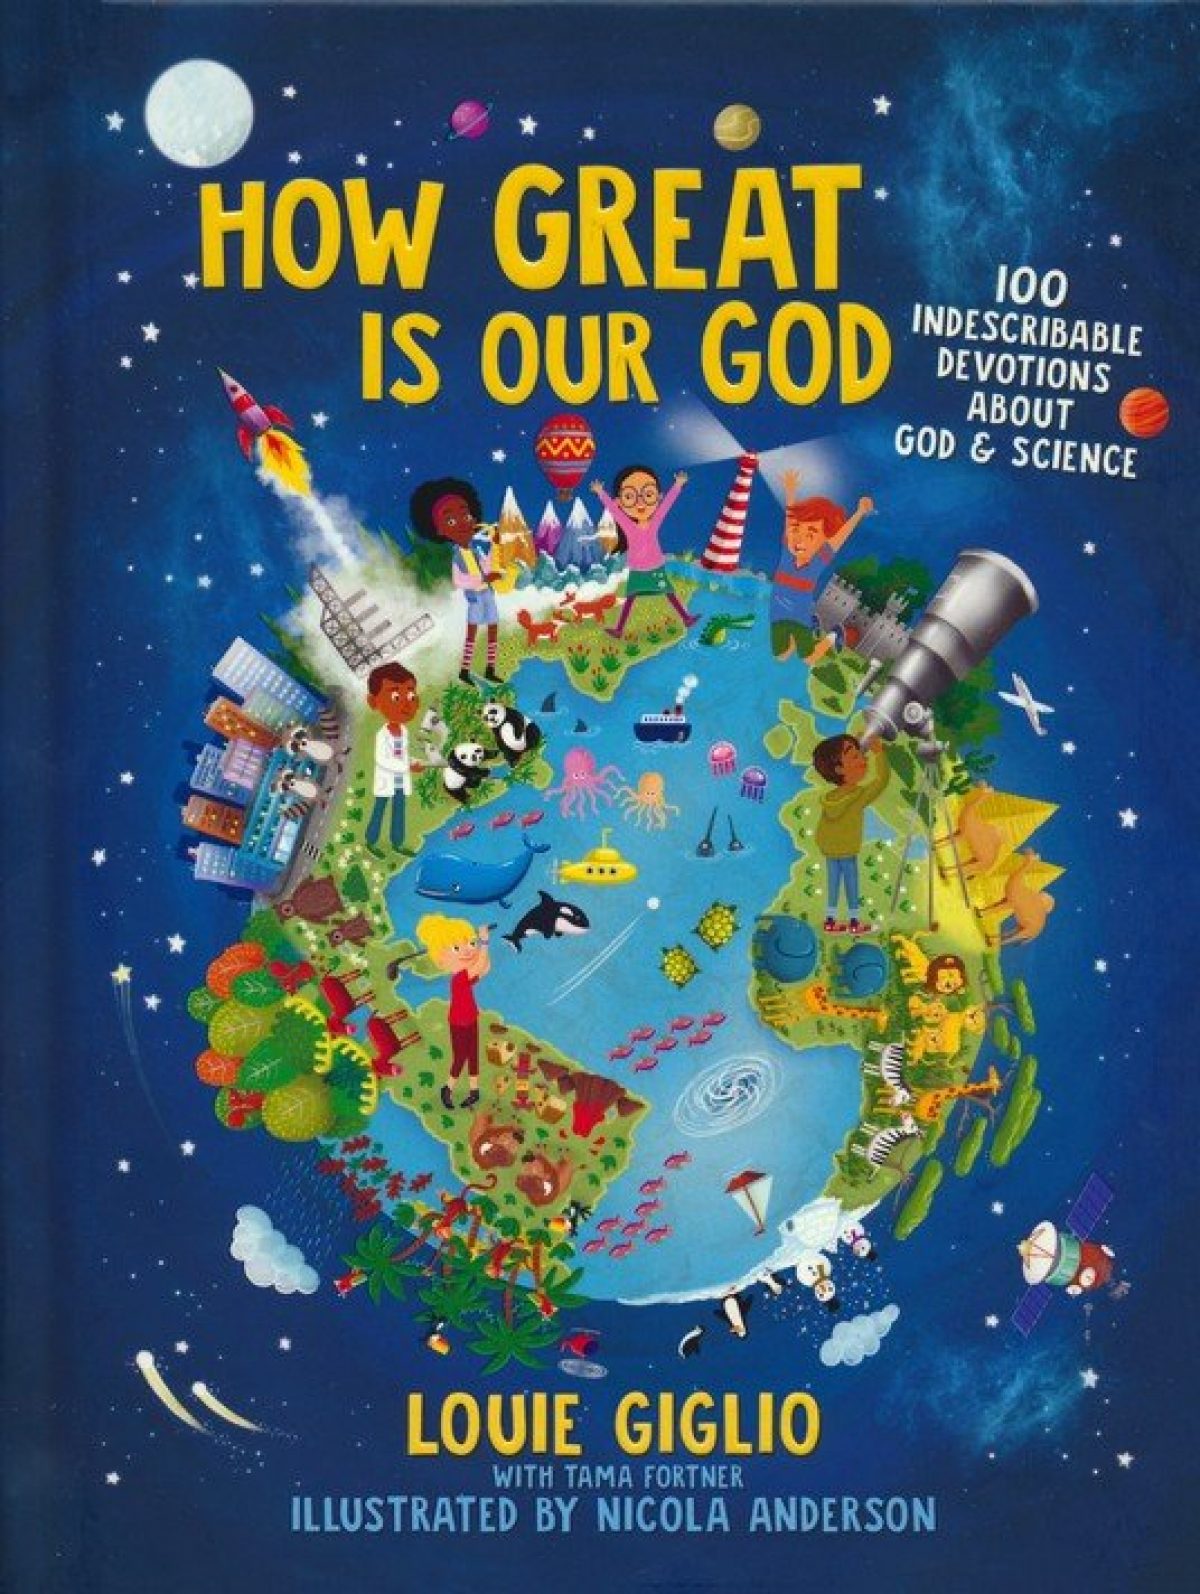 how great is our god 100 indescribable devotions about god and science